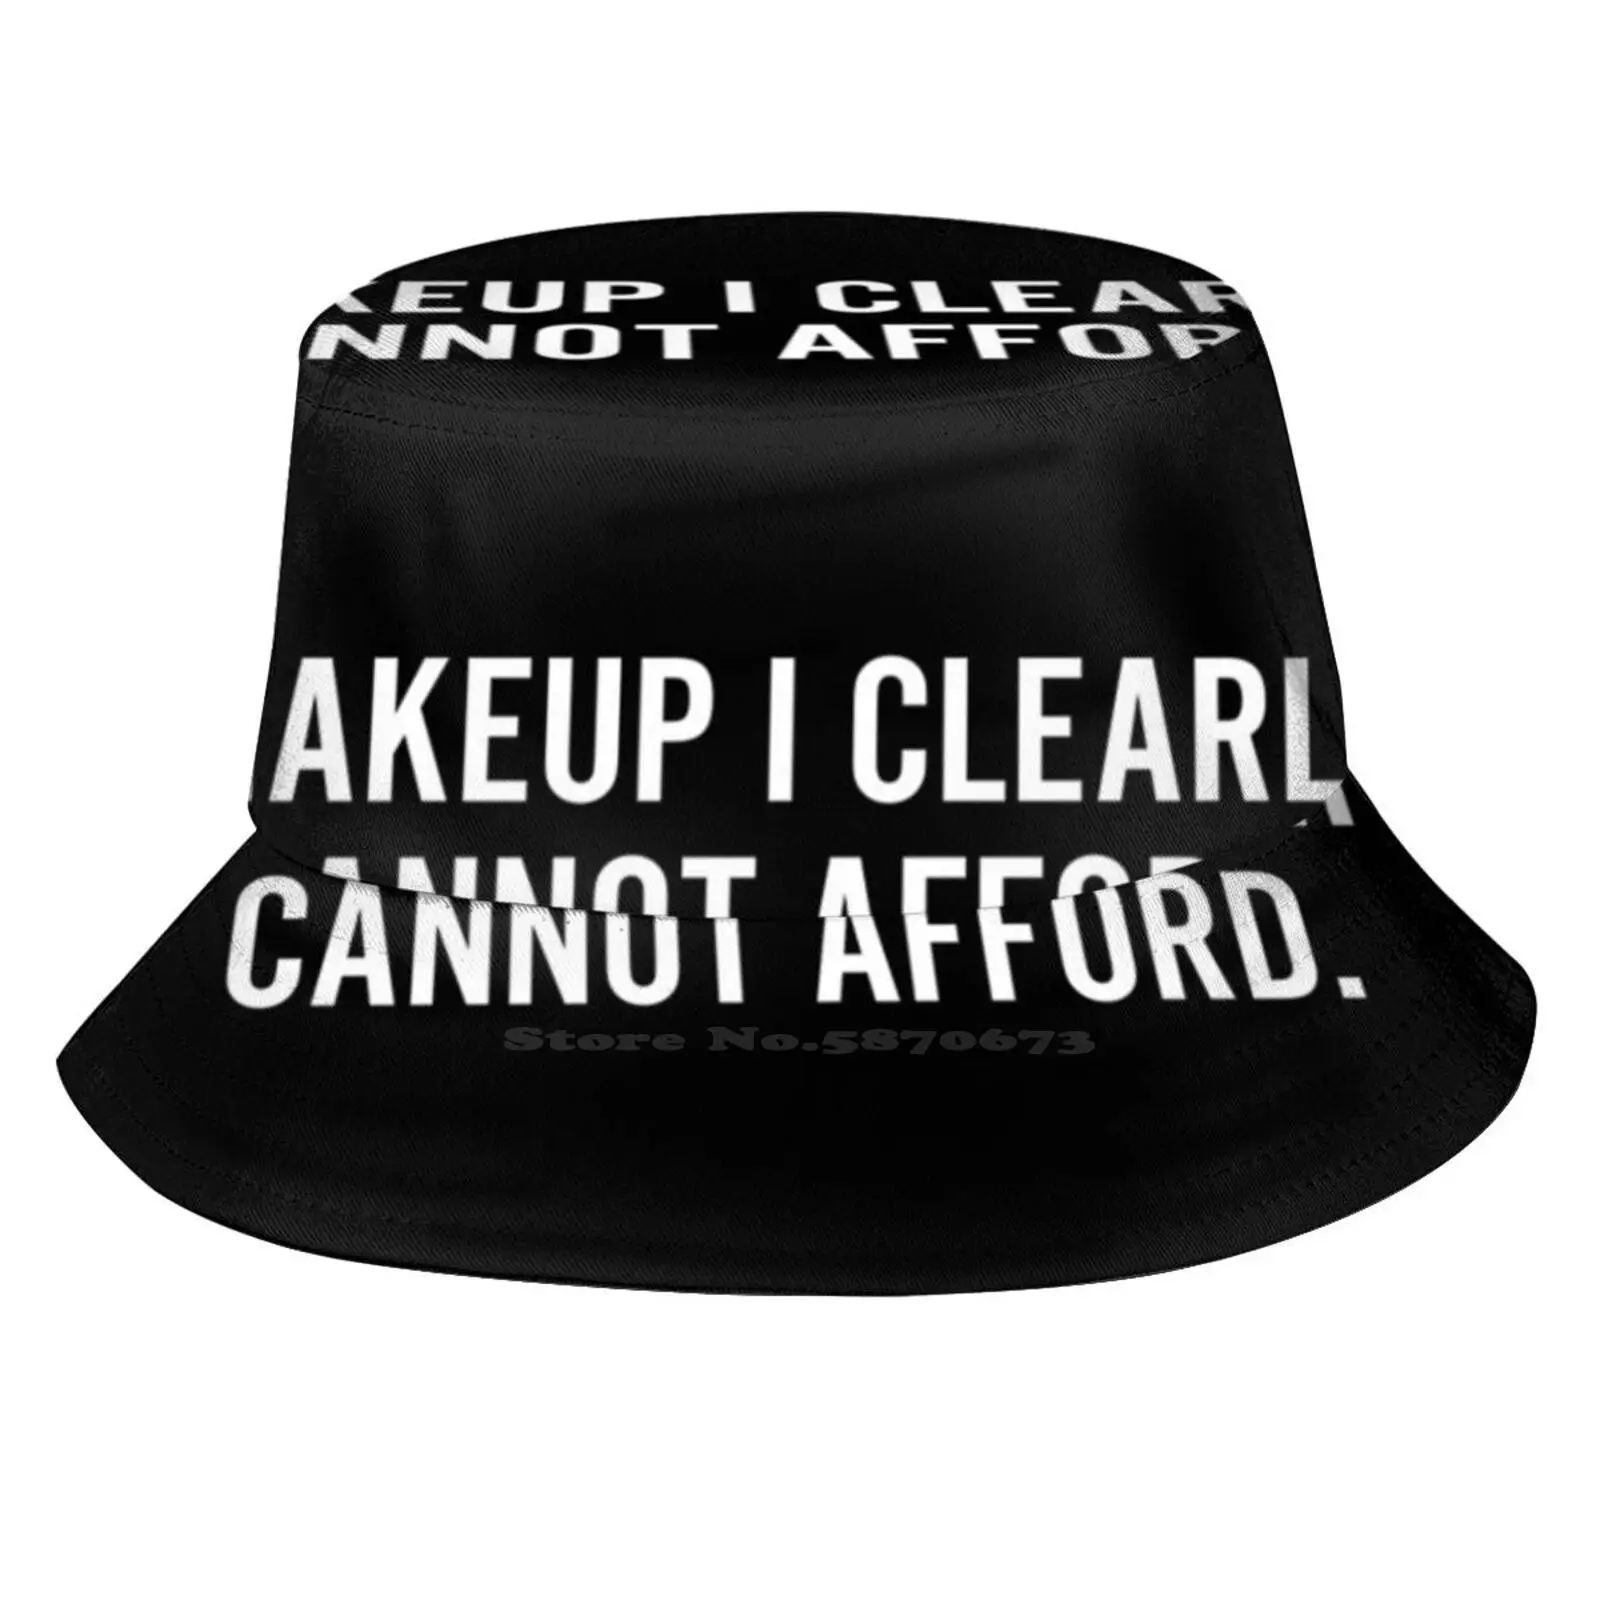 Makeup I Clearly Cannot Unisex Fisherman Hats Cap Makeup Beauty Funny Youtuber Spear Ultra Expensive Brand High End Pretty